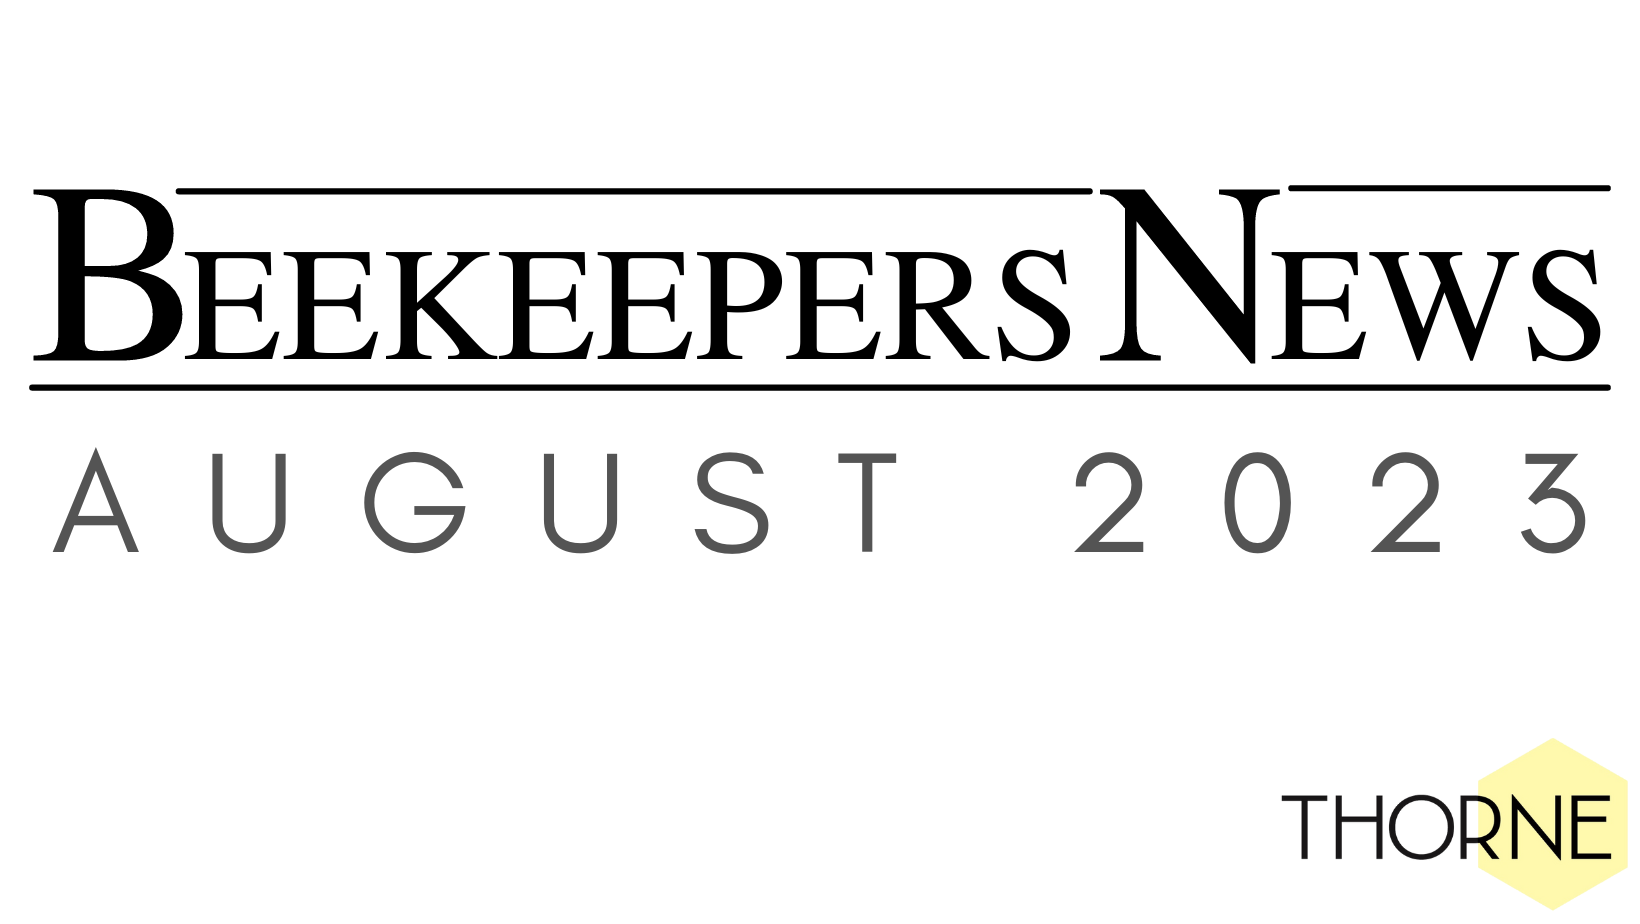 Beekeepers News - August - Issue 83